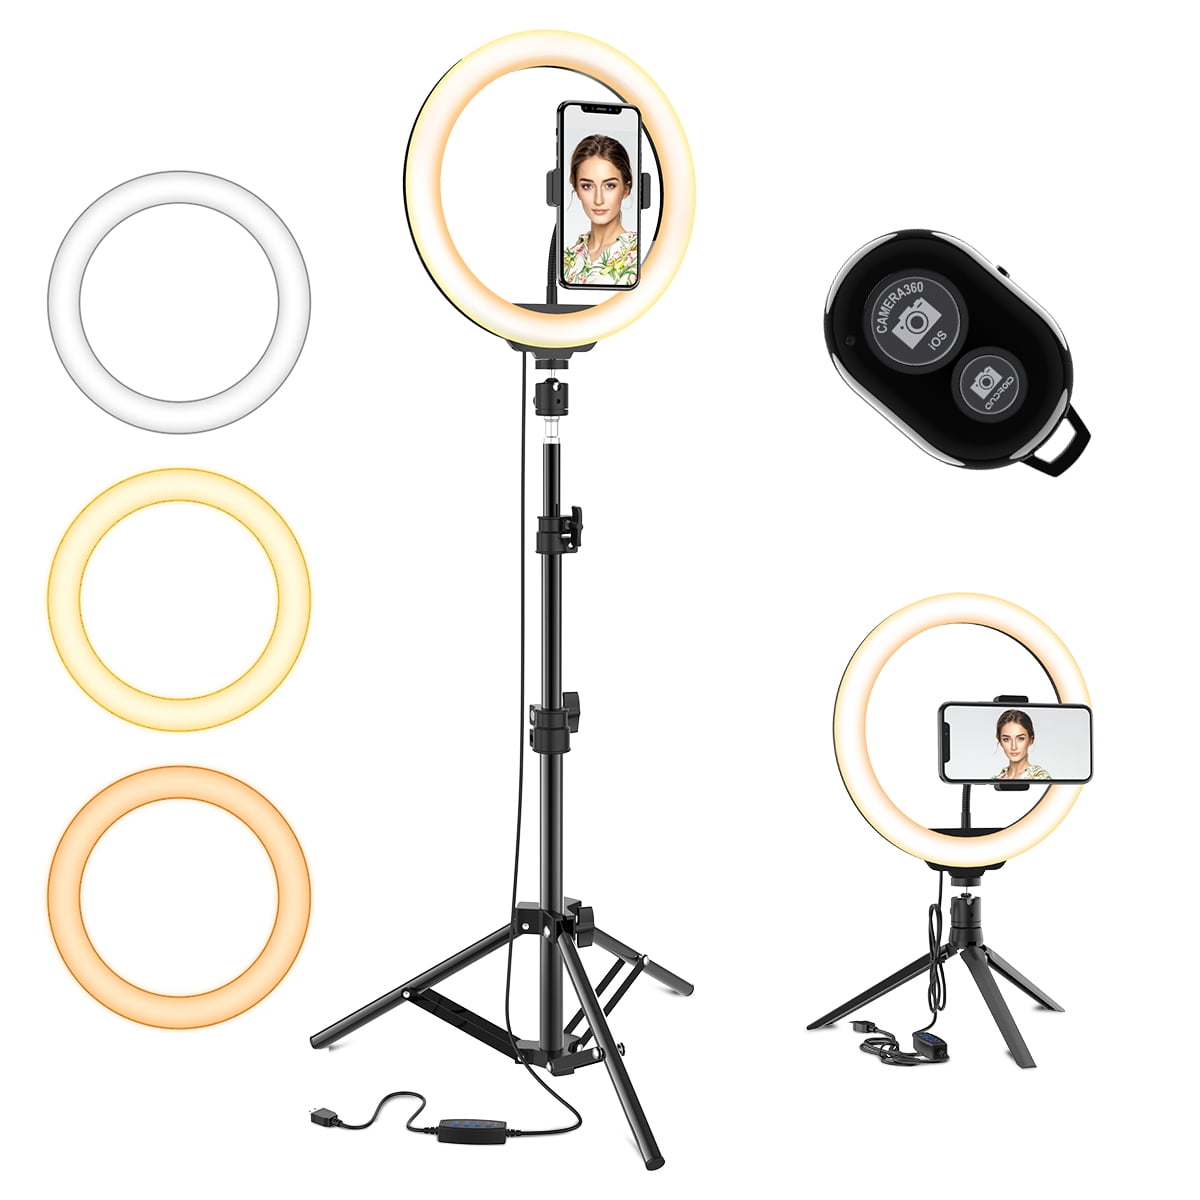 10.2" Ring Light with Stand BlitzWolf RGB LED Ring Light with Stand and Phone & 